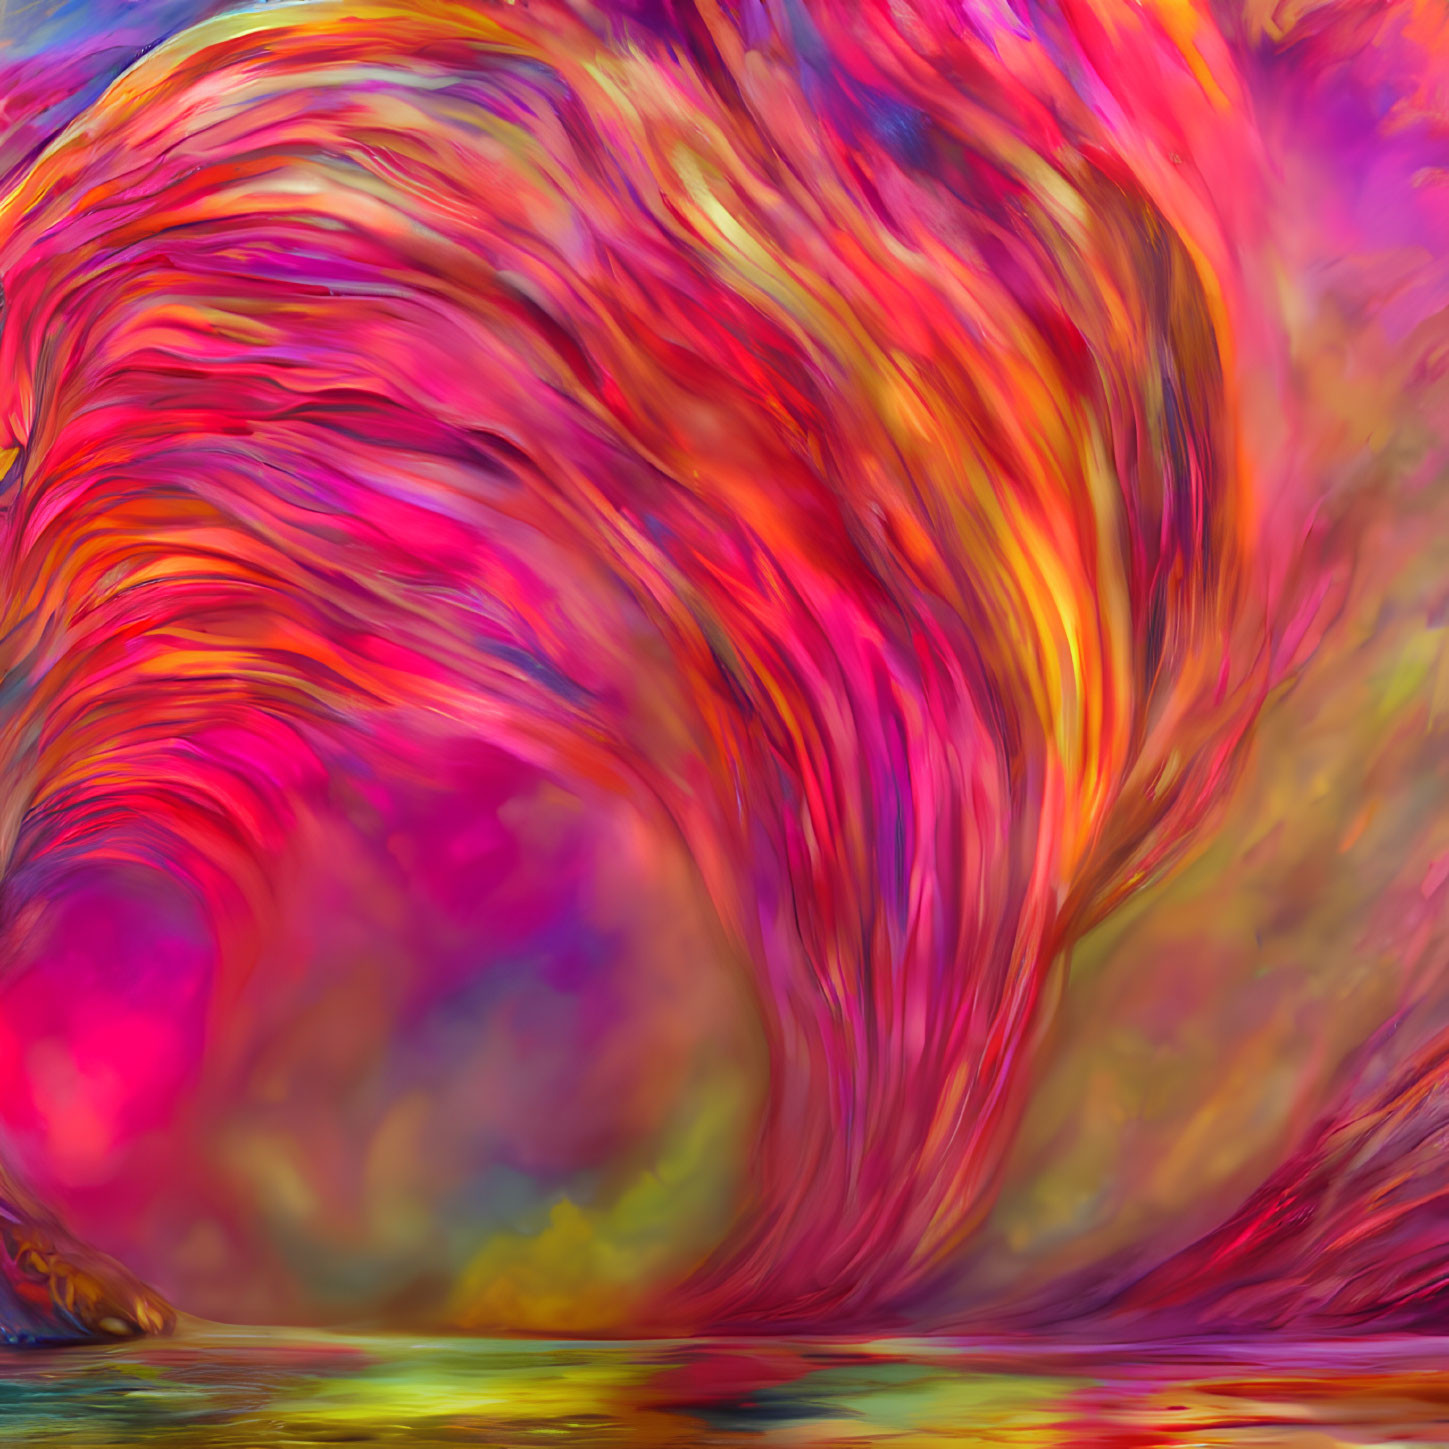 Colorful Swirling Abstract Patterns in Pink, Orange, and Yellow